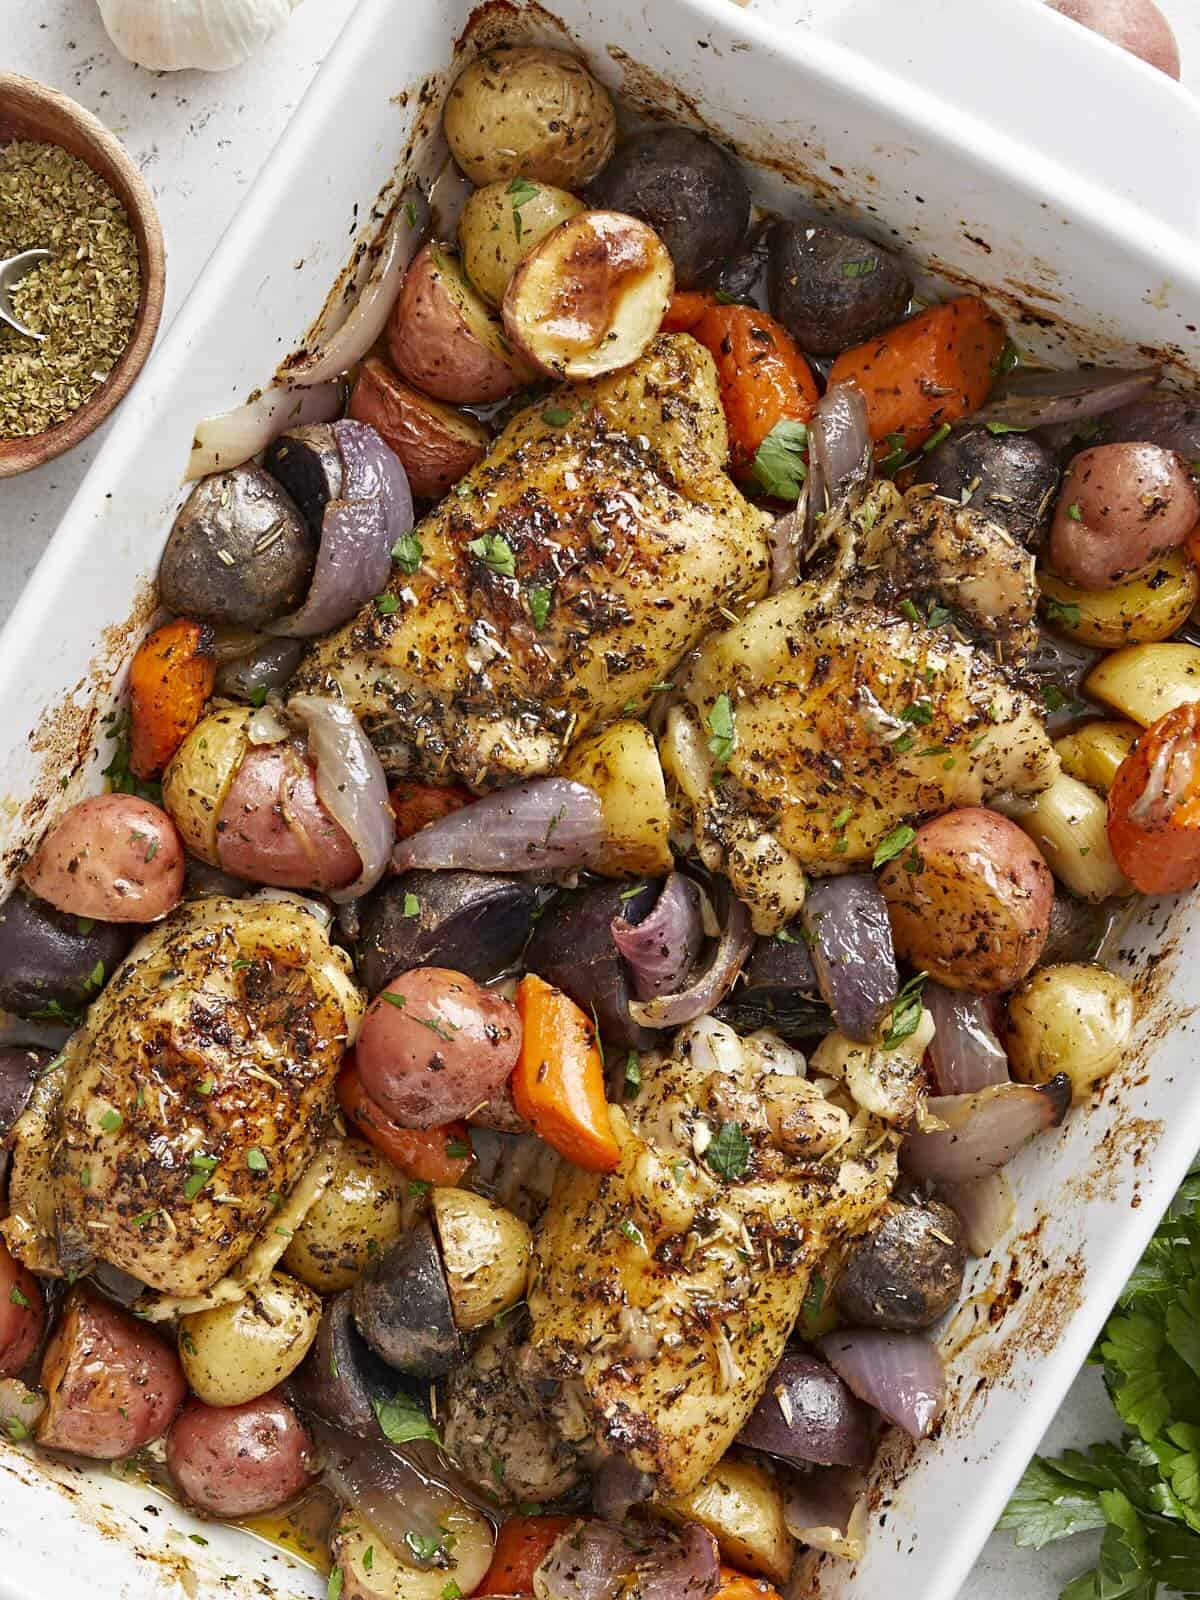 Overhead view of a large white casserole dish filled with roasted chicken and vegetables.